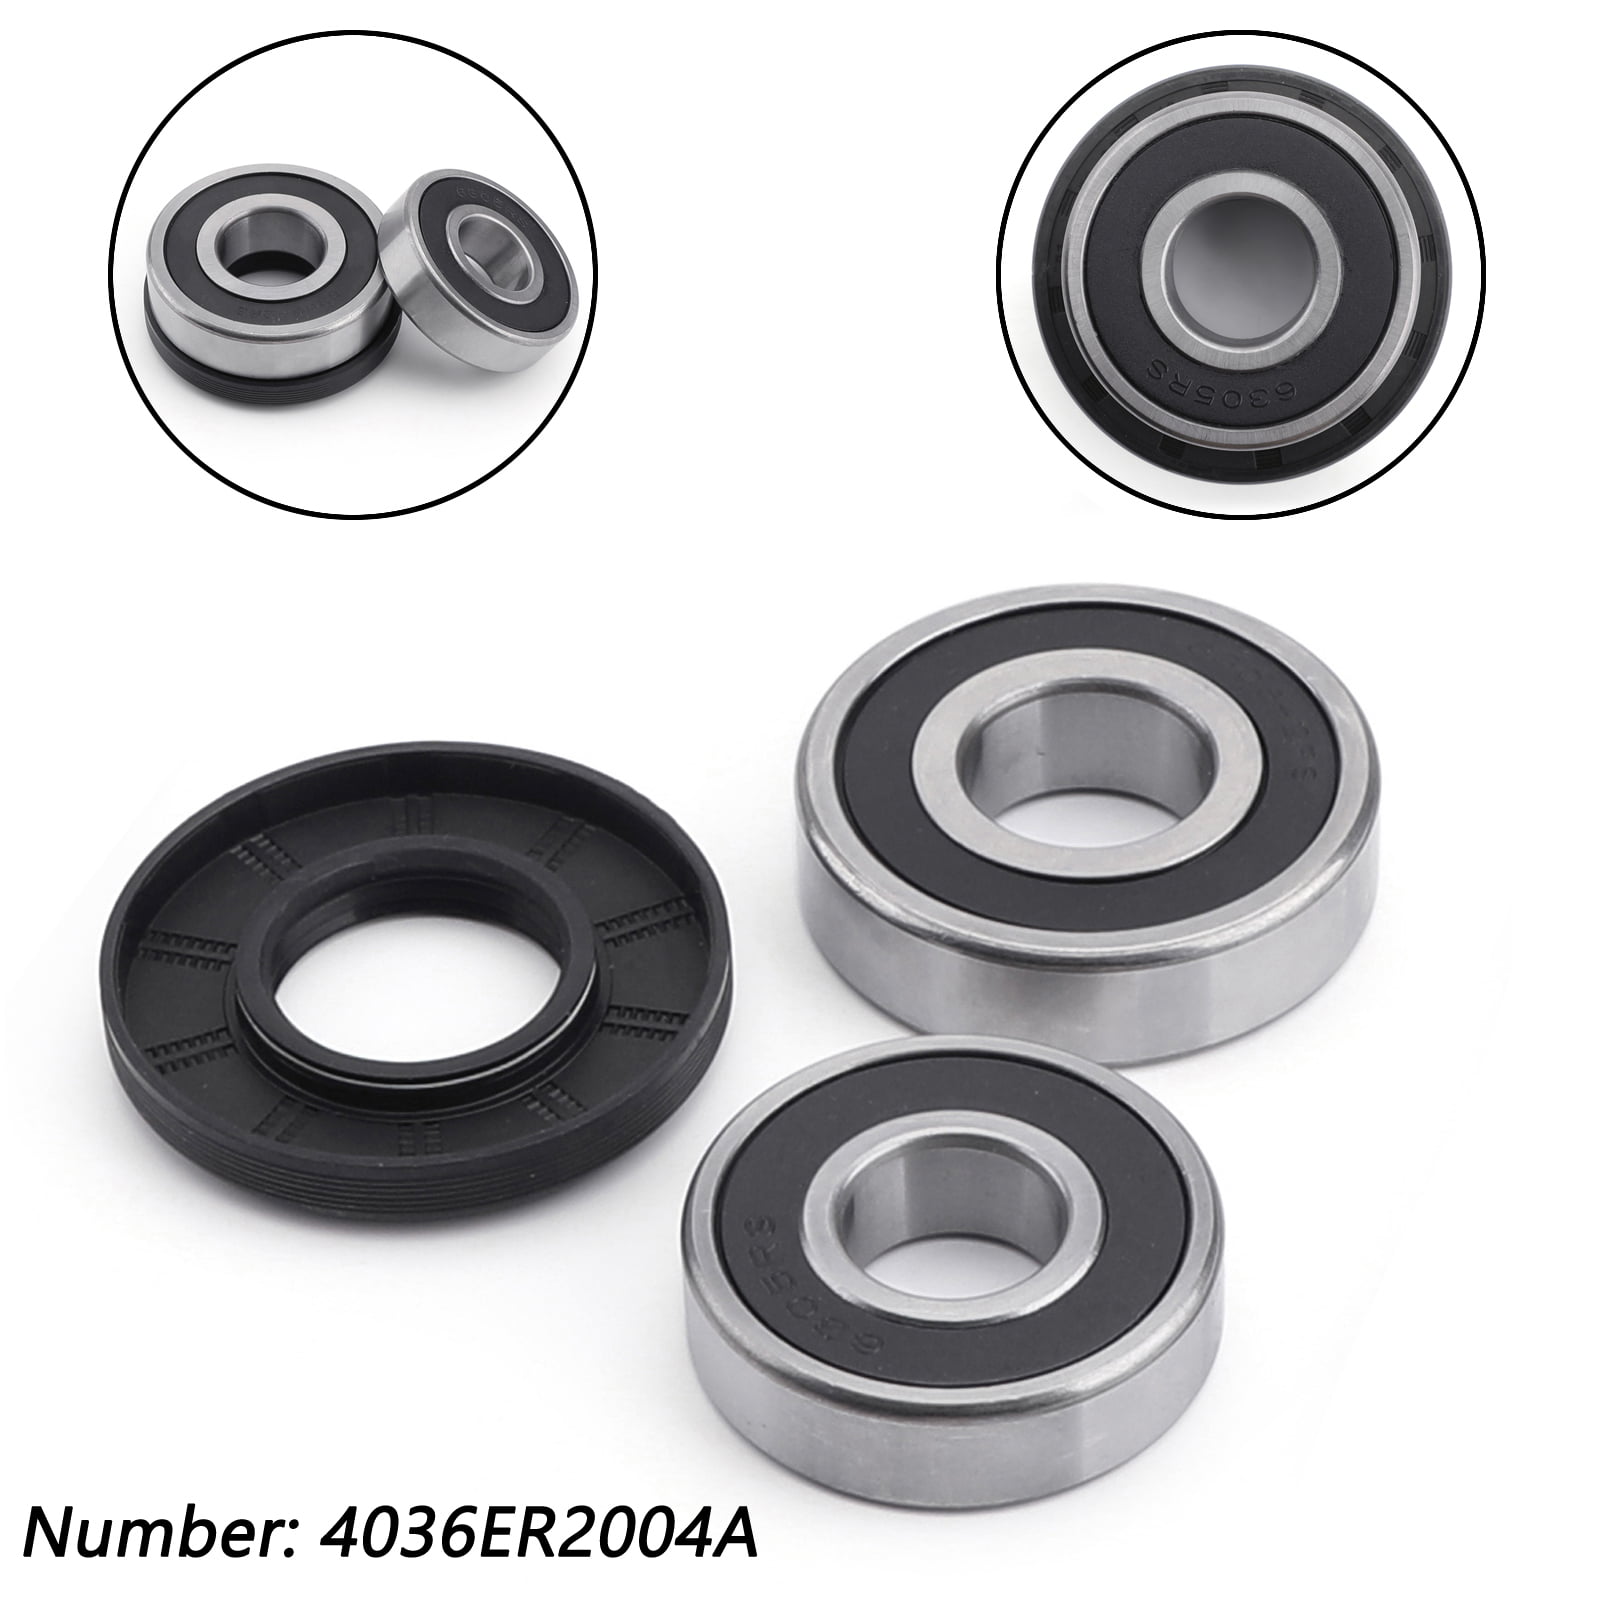 LG FRONT LOAD WASHER,2 TUB BEARINGS & SEAL Kenmore 4036er2004a 